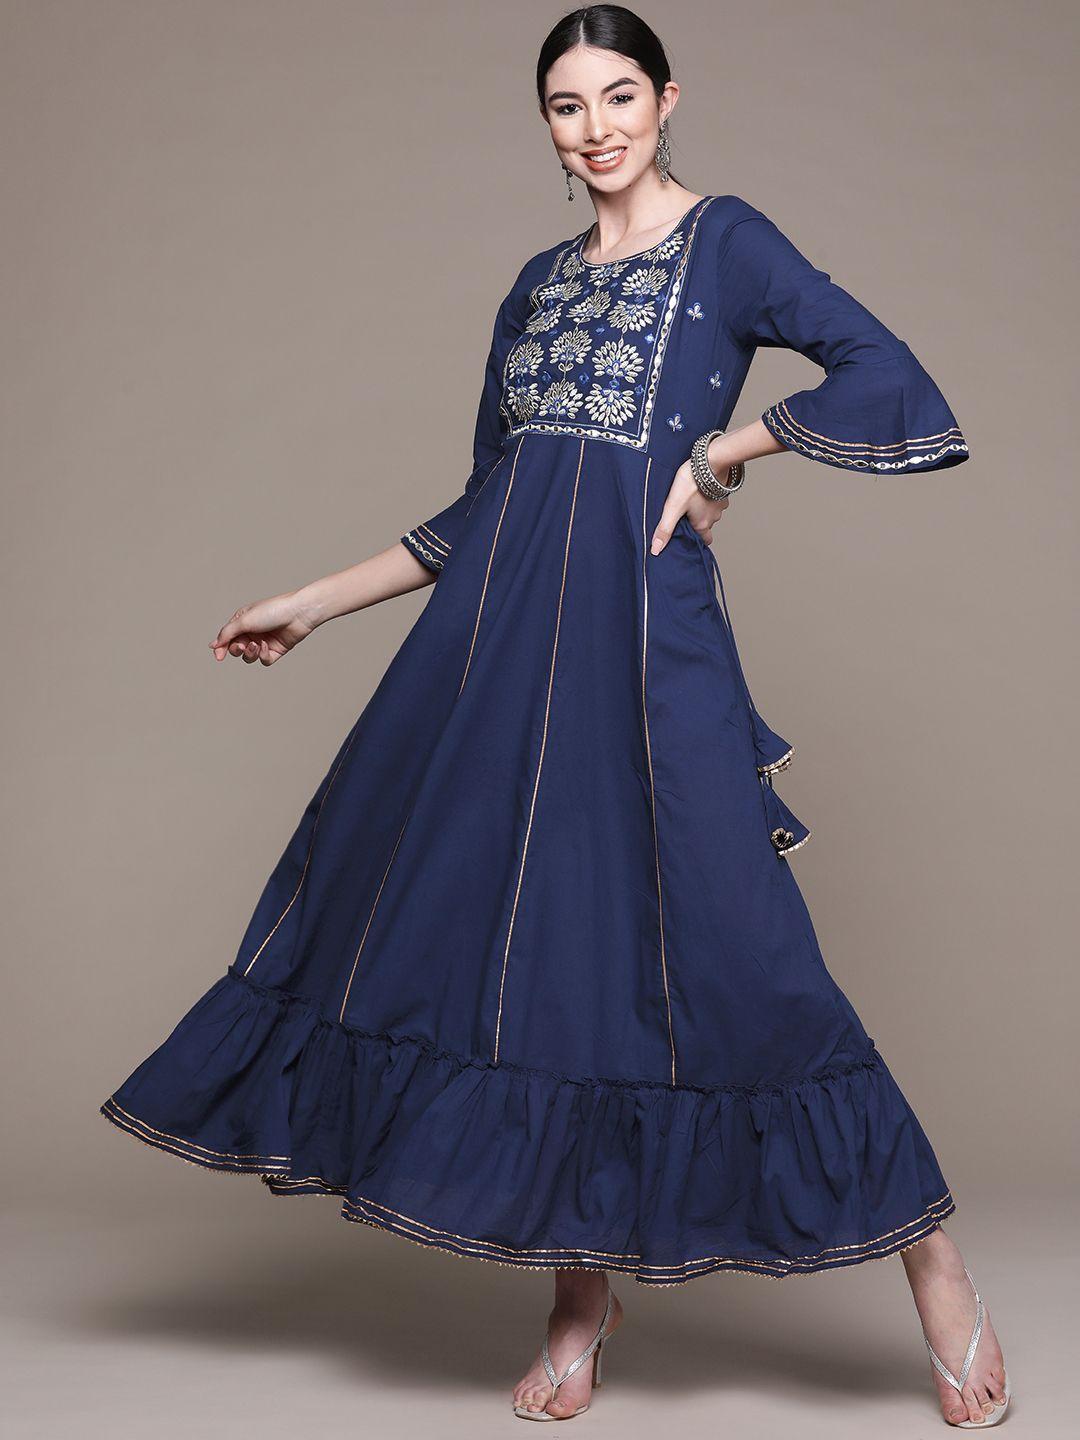 anubhutee-blue-ethnic-motifs-embroidered-ethnic-cotton-a-line-maxi-dress